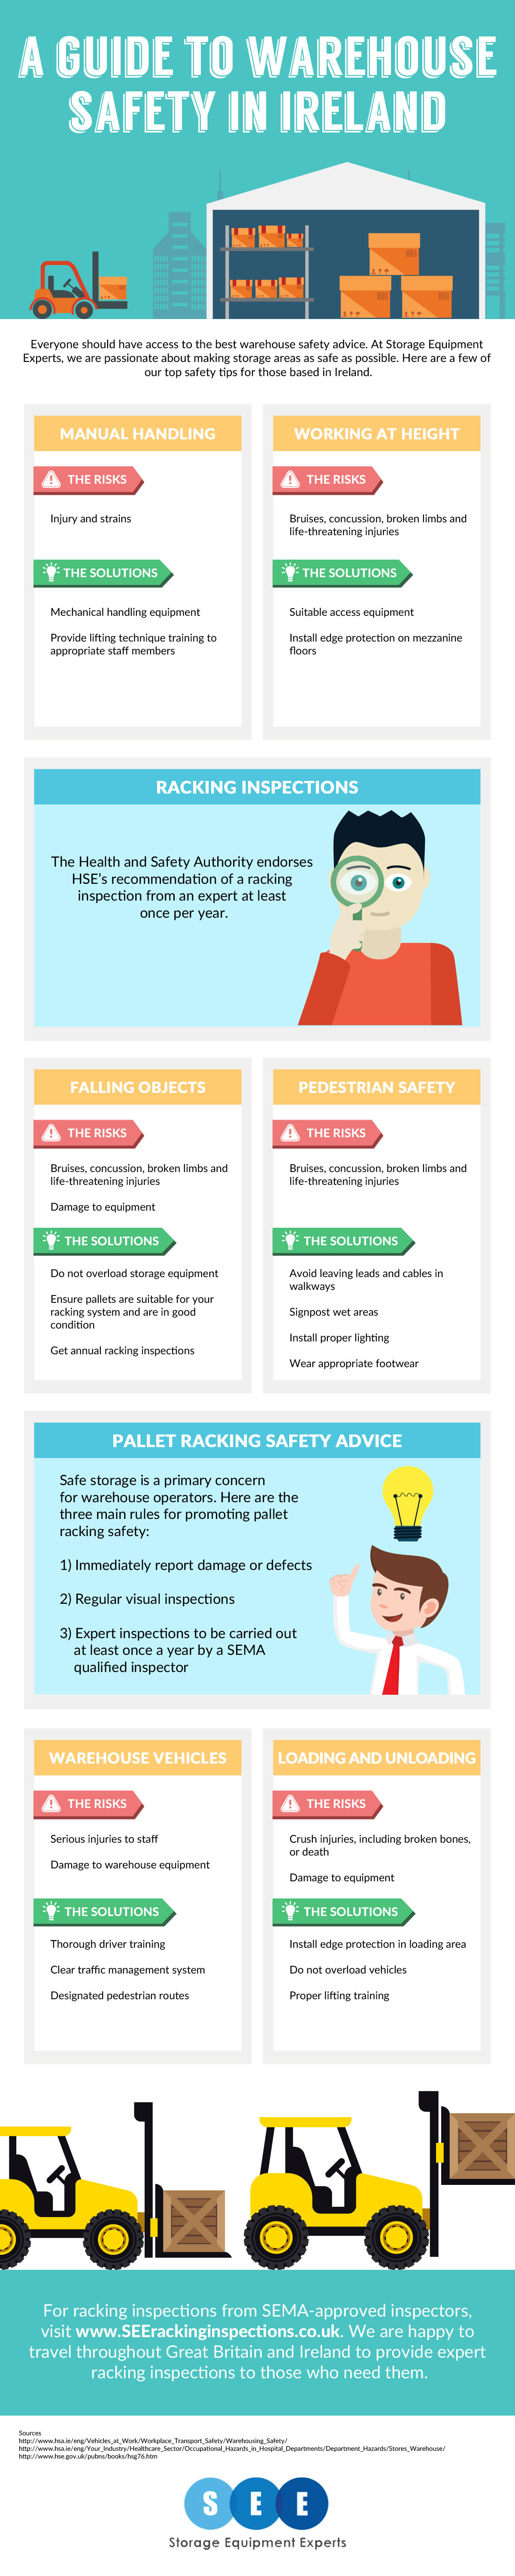 A Guide to Warehouse Safety in Ireland